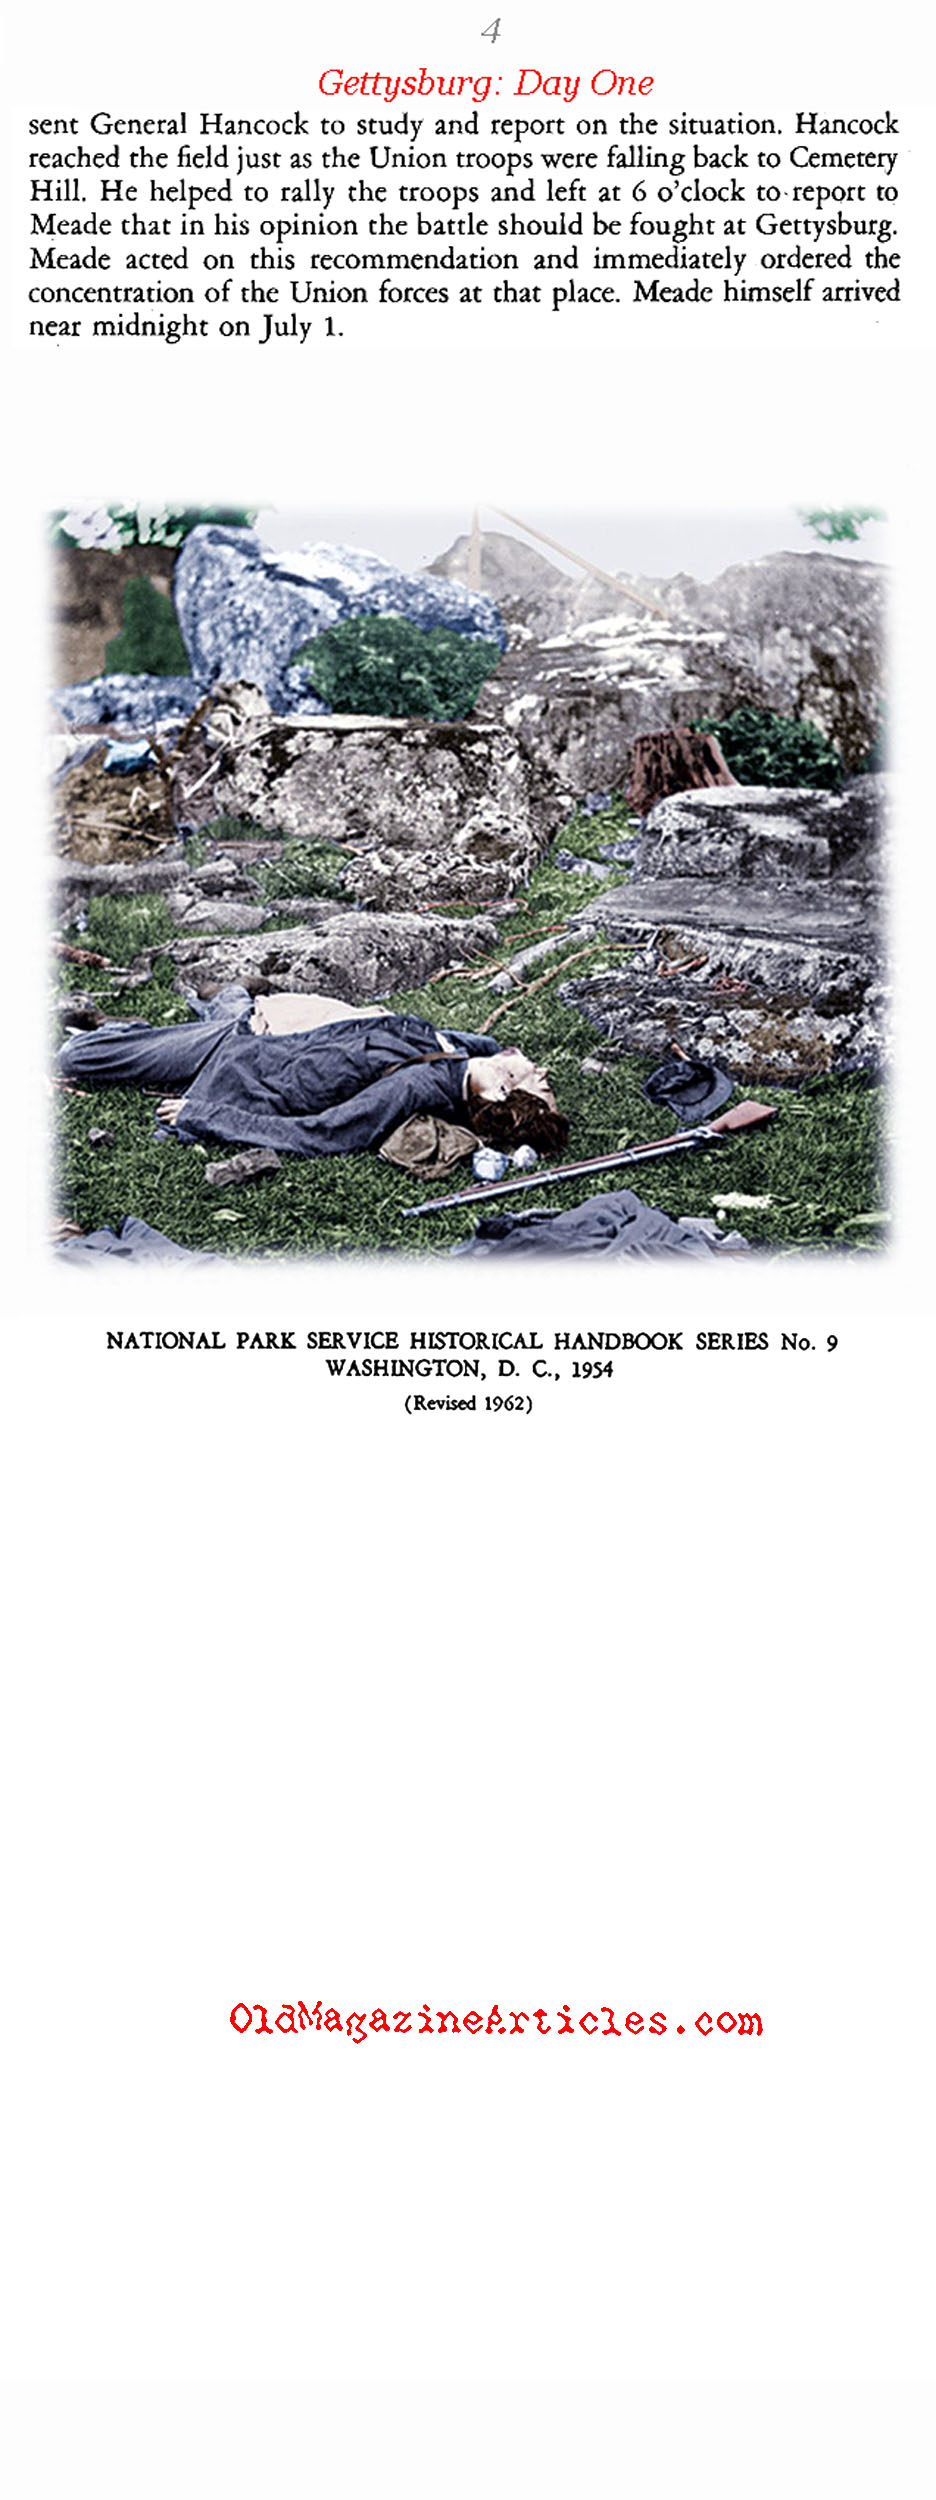 The Battle of Gettysburg: Day One (National Park Service, 1954)